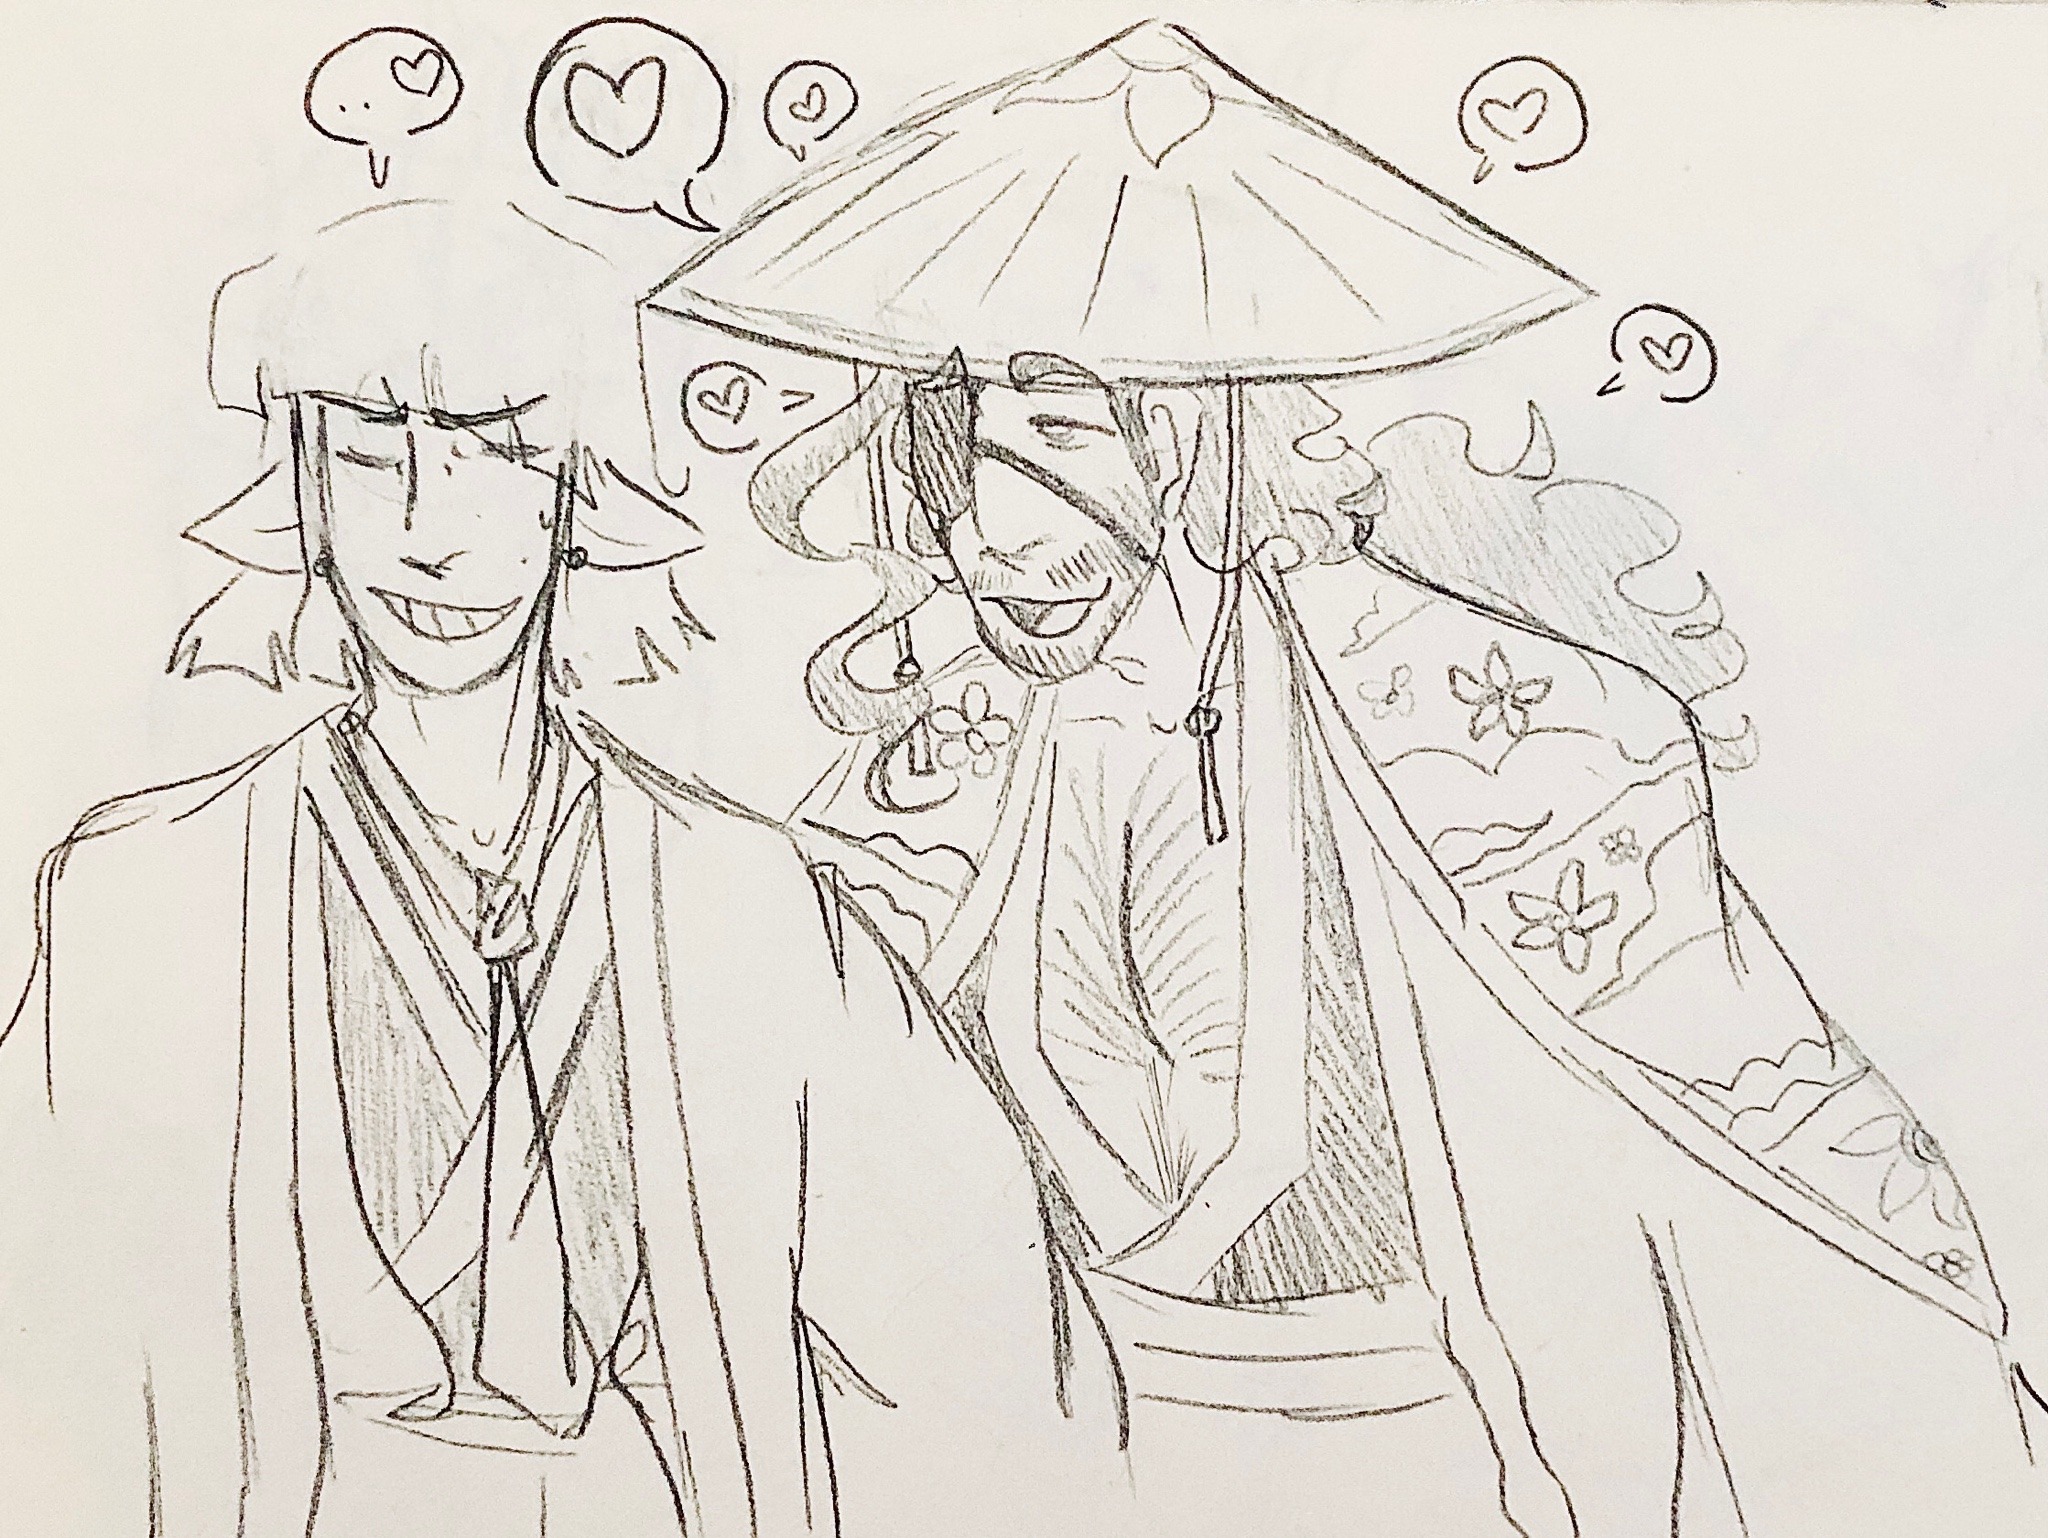 malewife-urahara:Just some flirting you know how it is in the gotei